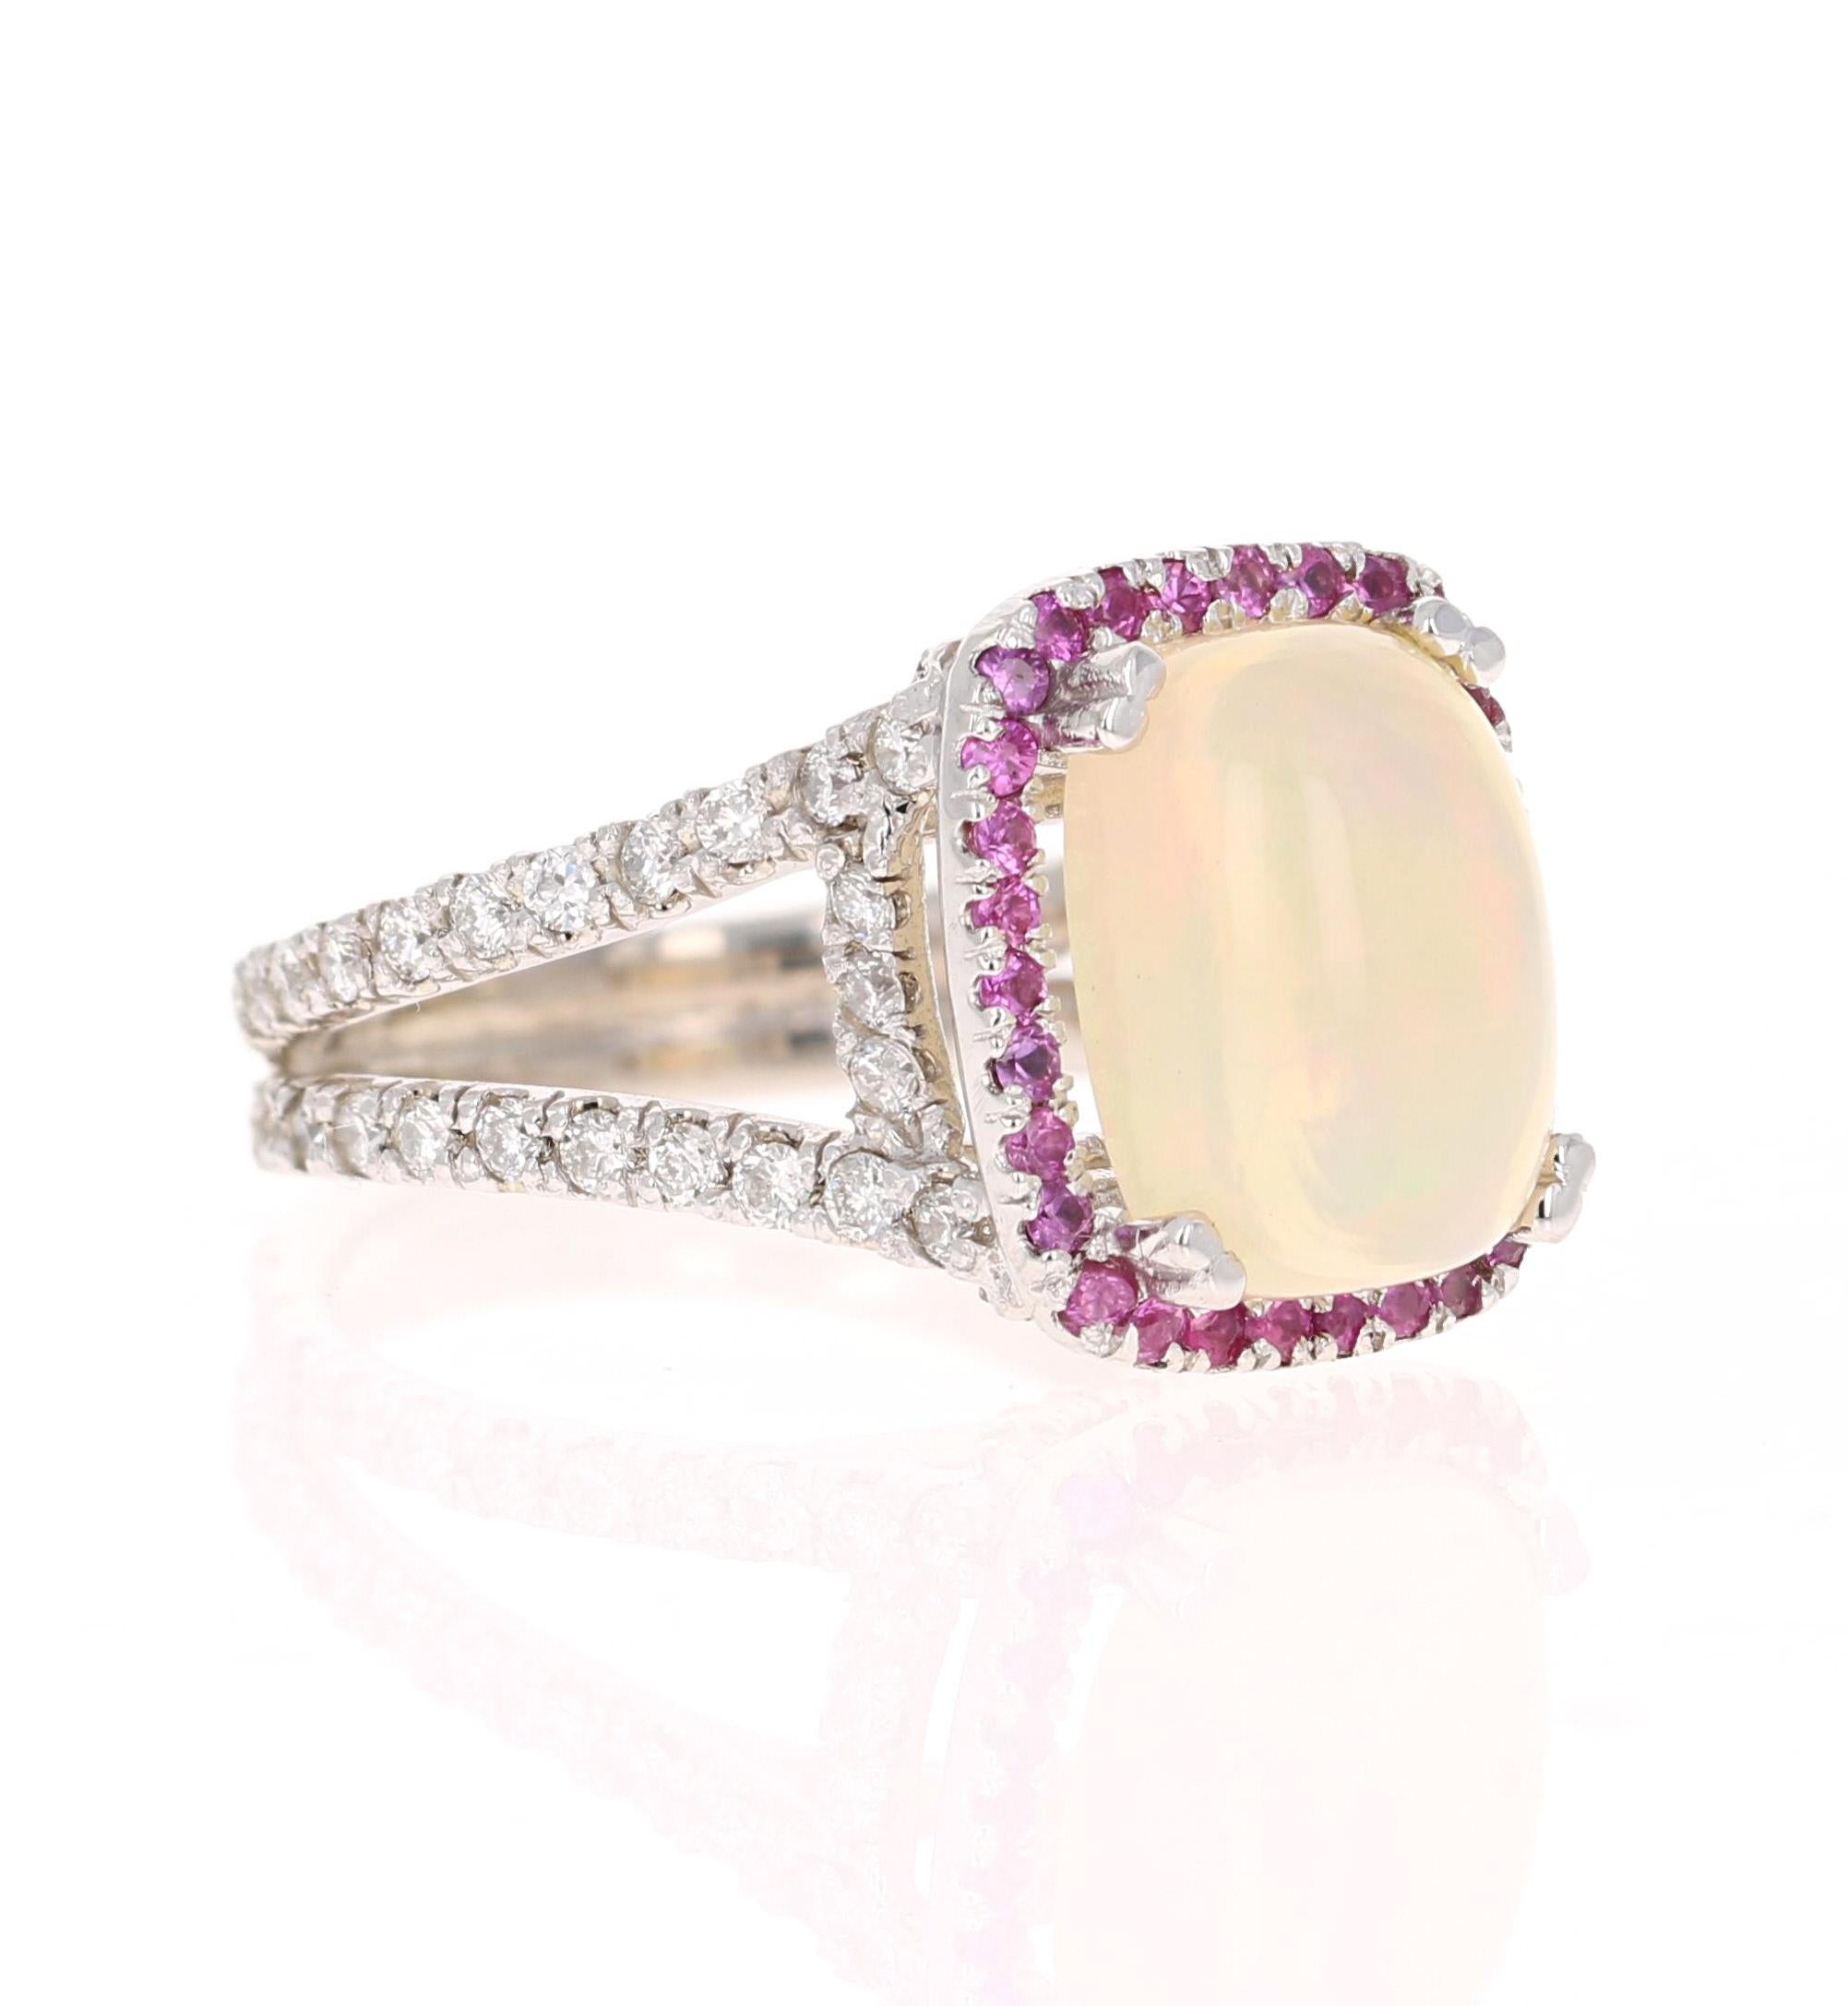 This stunning piece has a 3.80 carat opulent Opal set in the center of the ring.  The Opal is surrounded by a row of 28 Pink Sapphires that weigh 0.40 carats and 72 Round Cut Diamonds that weigh 1.05 carats.   The total carat weight of the ring is